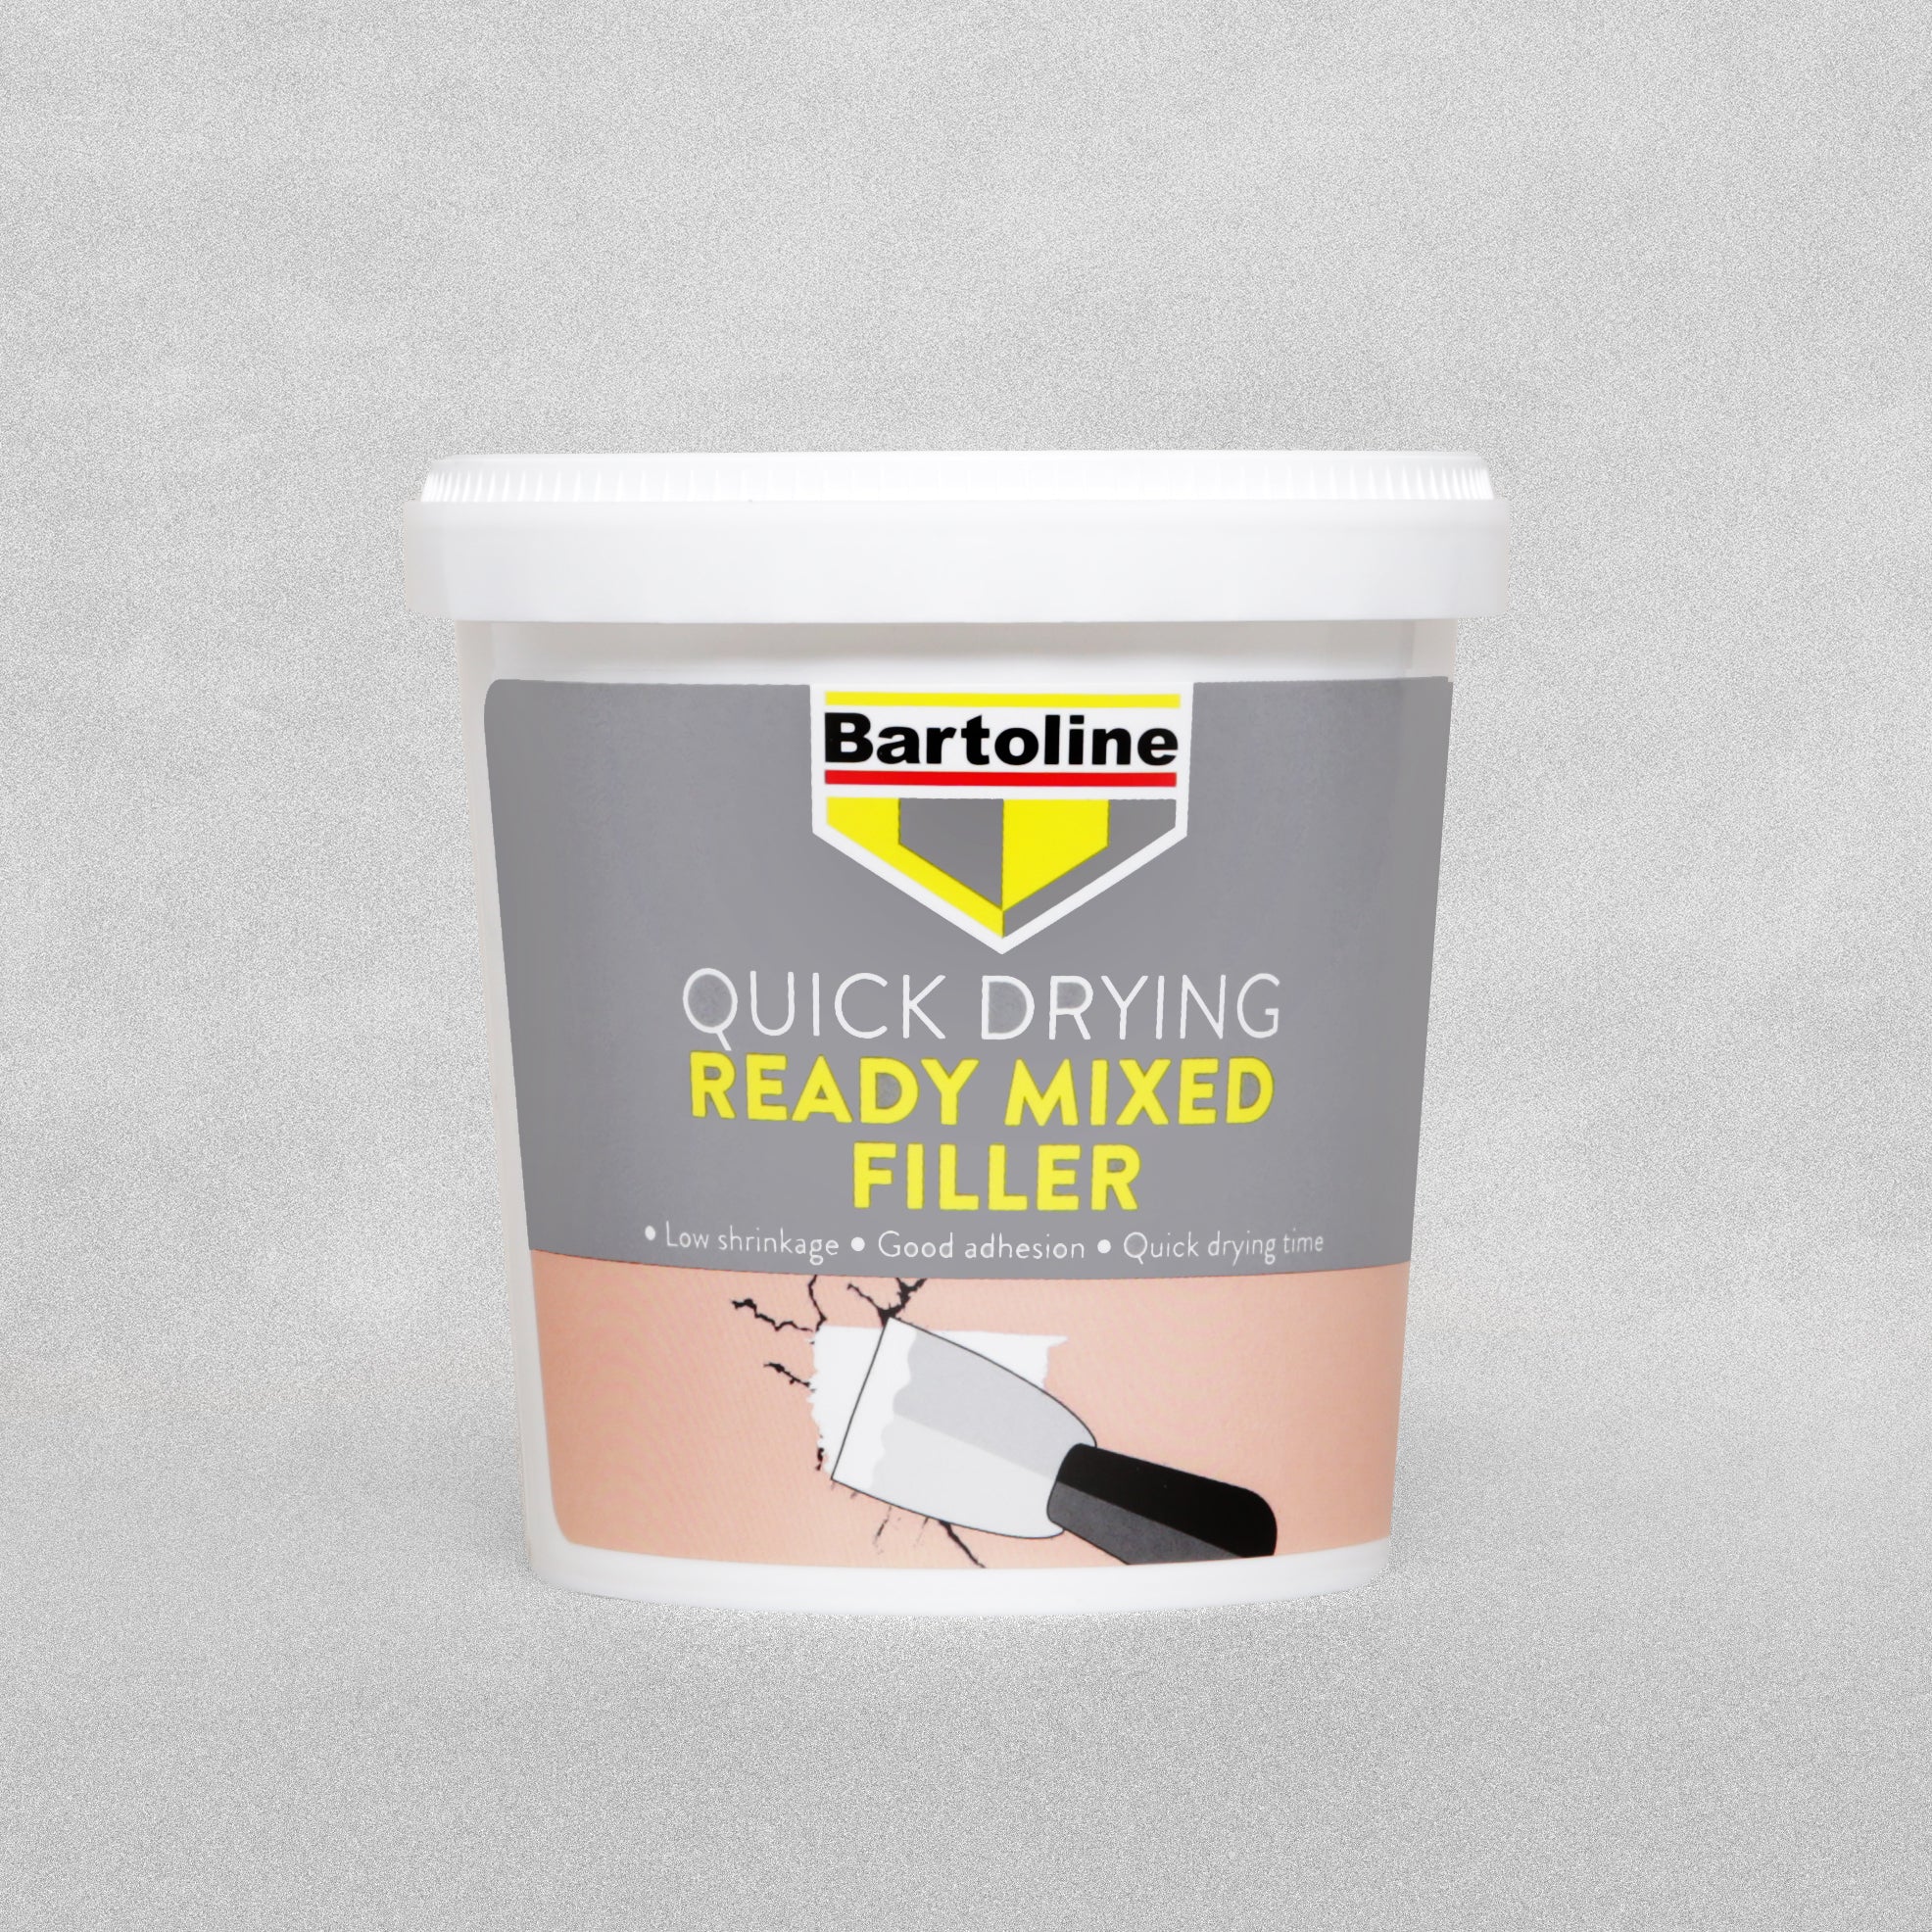 Bartoline Quick Drying Ready Mixed Filler - 1KG